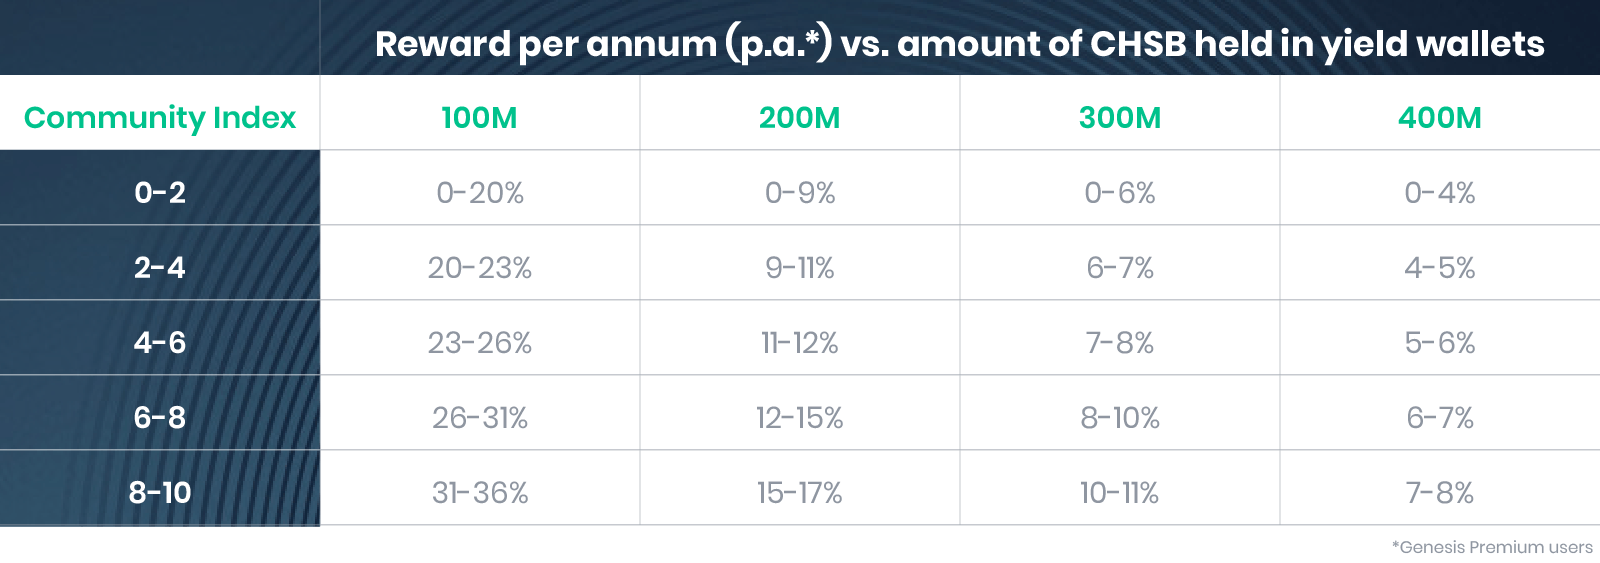 Rewards per annum (p.a*) vs amount of CHSB held in yield wallets